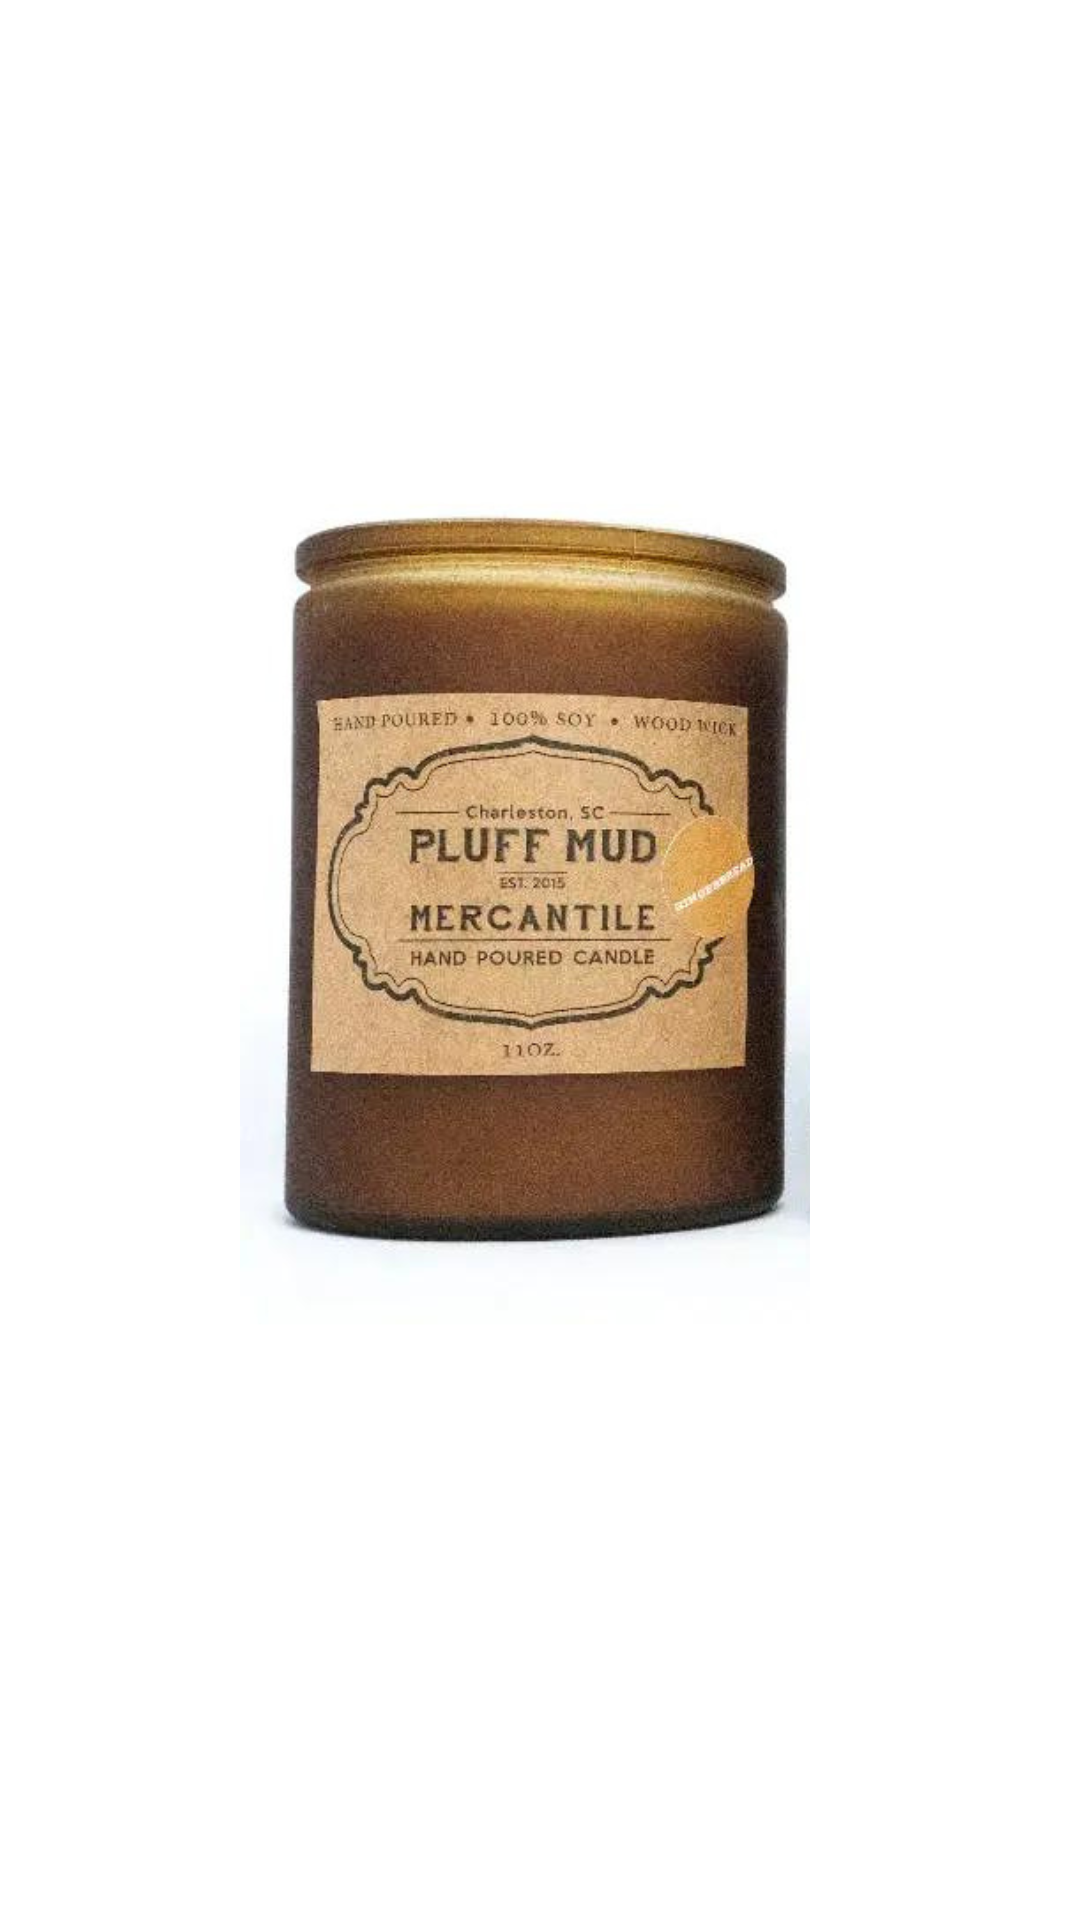 Sweet Tea Twist Hand Poured Soy Candle - Pluff Mud Mercantile